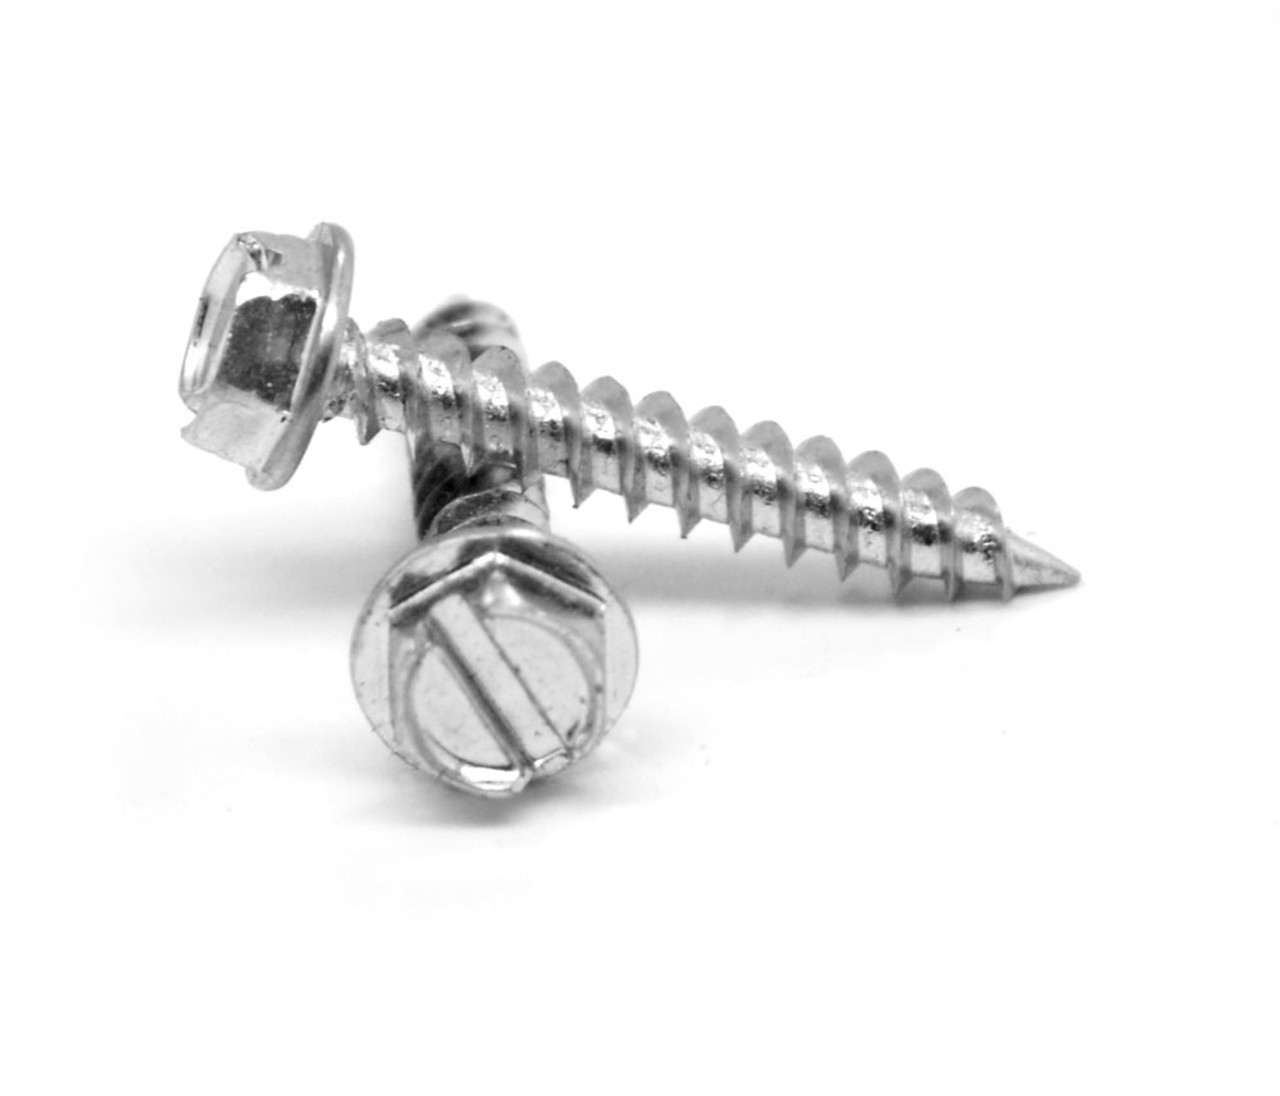 #8-15 x 3/4" (FT) 1/4" AF Self-Piercing Sheet Metal Screw Slotted Hex Washer Head Stainless Steel 410